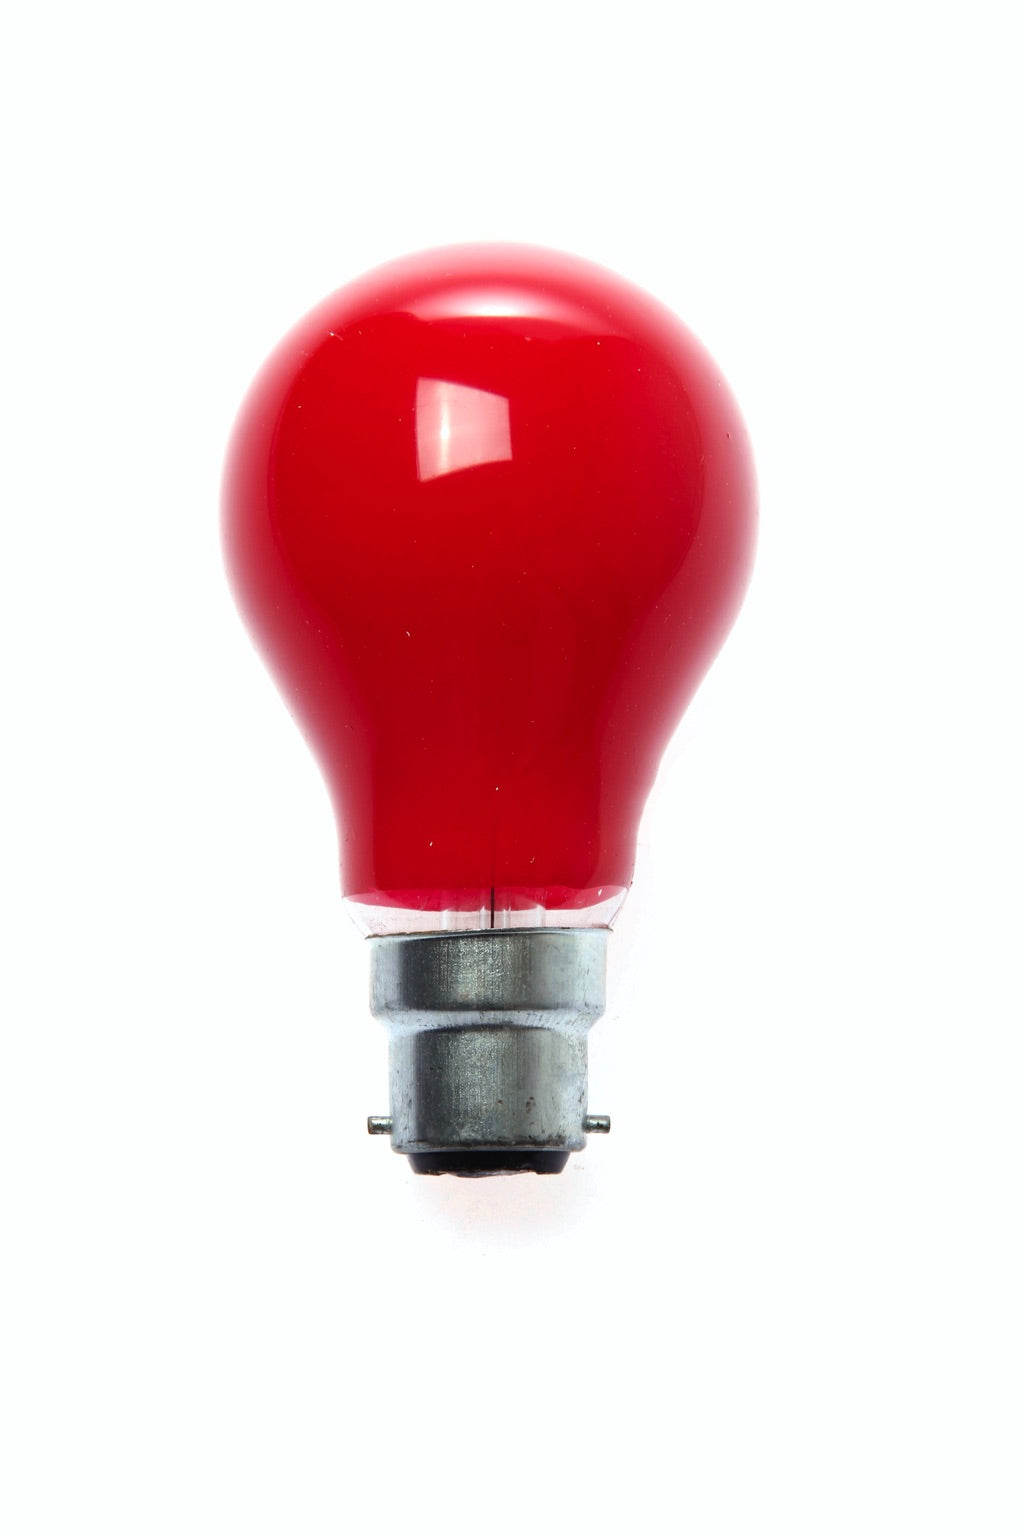 790331-LAMP COLORED B-22, 110-120V 20W RED